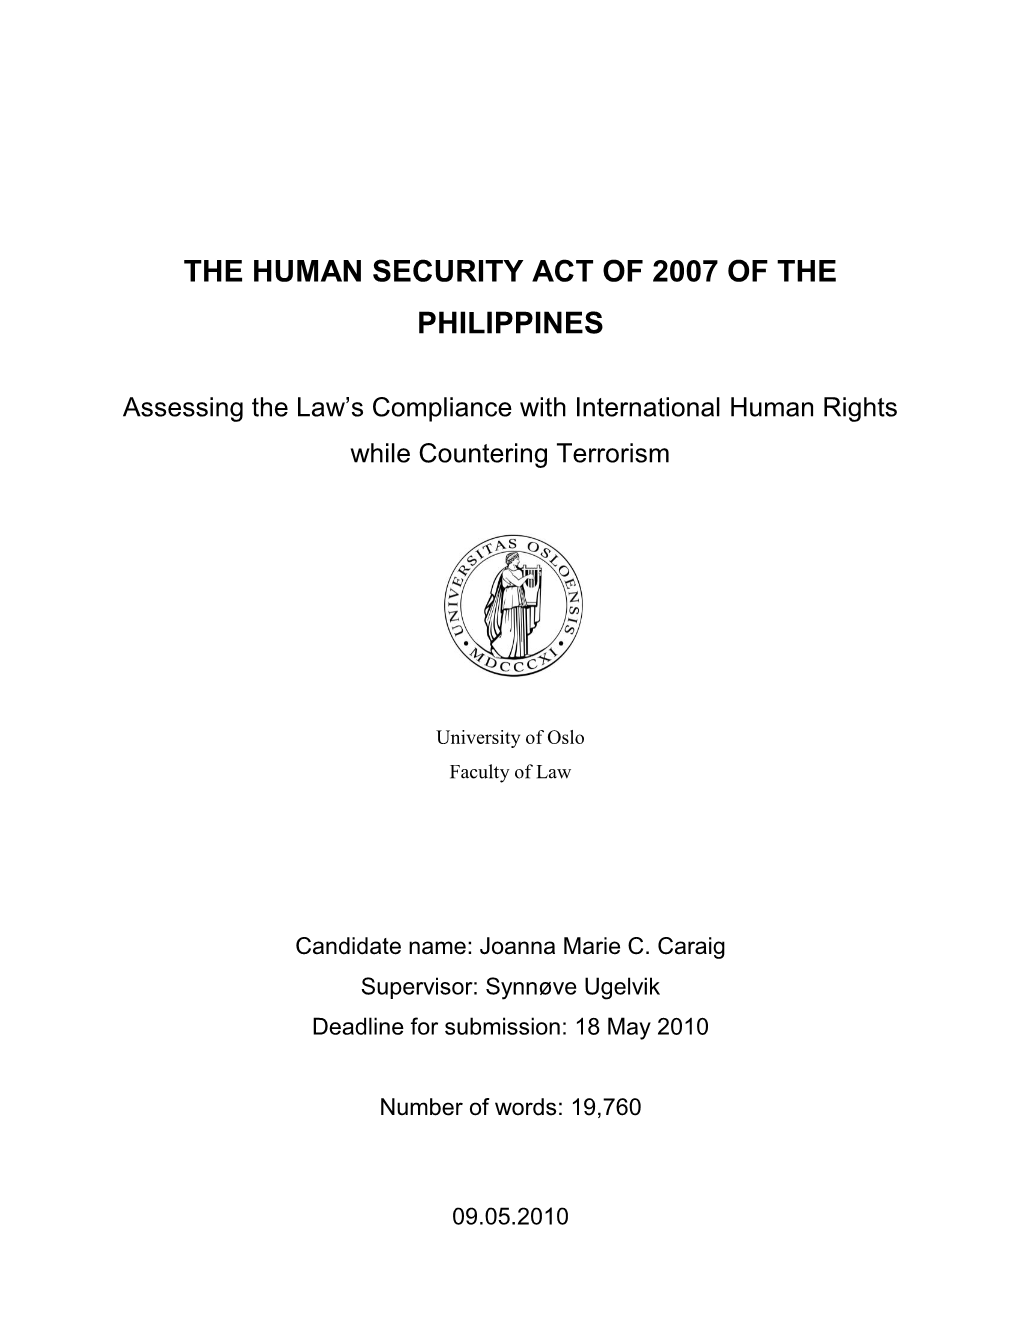 The Human Security Act of 2007 of the Philippines